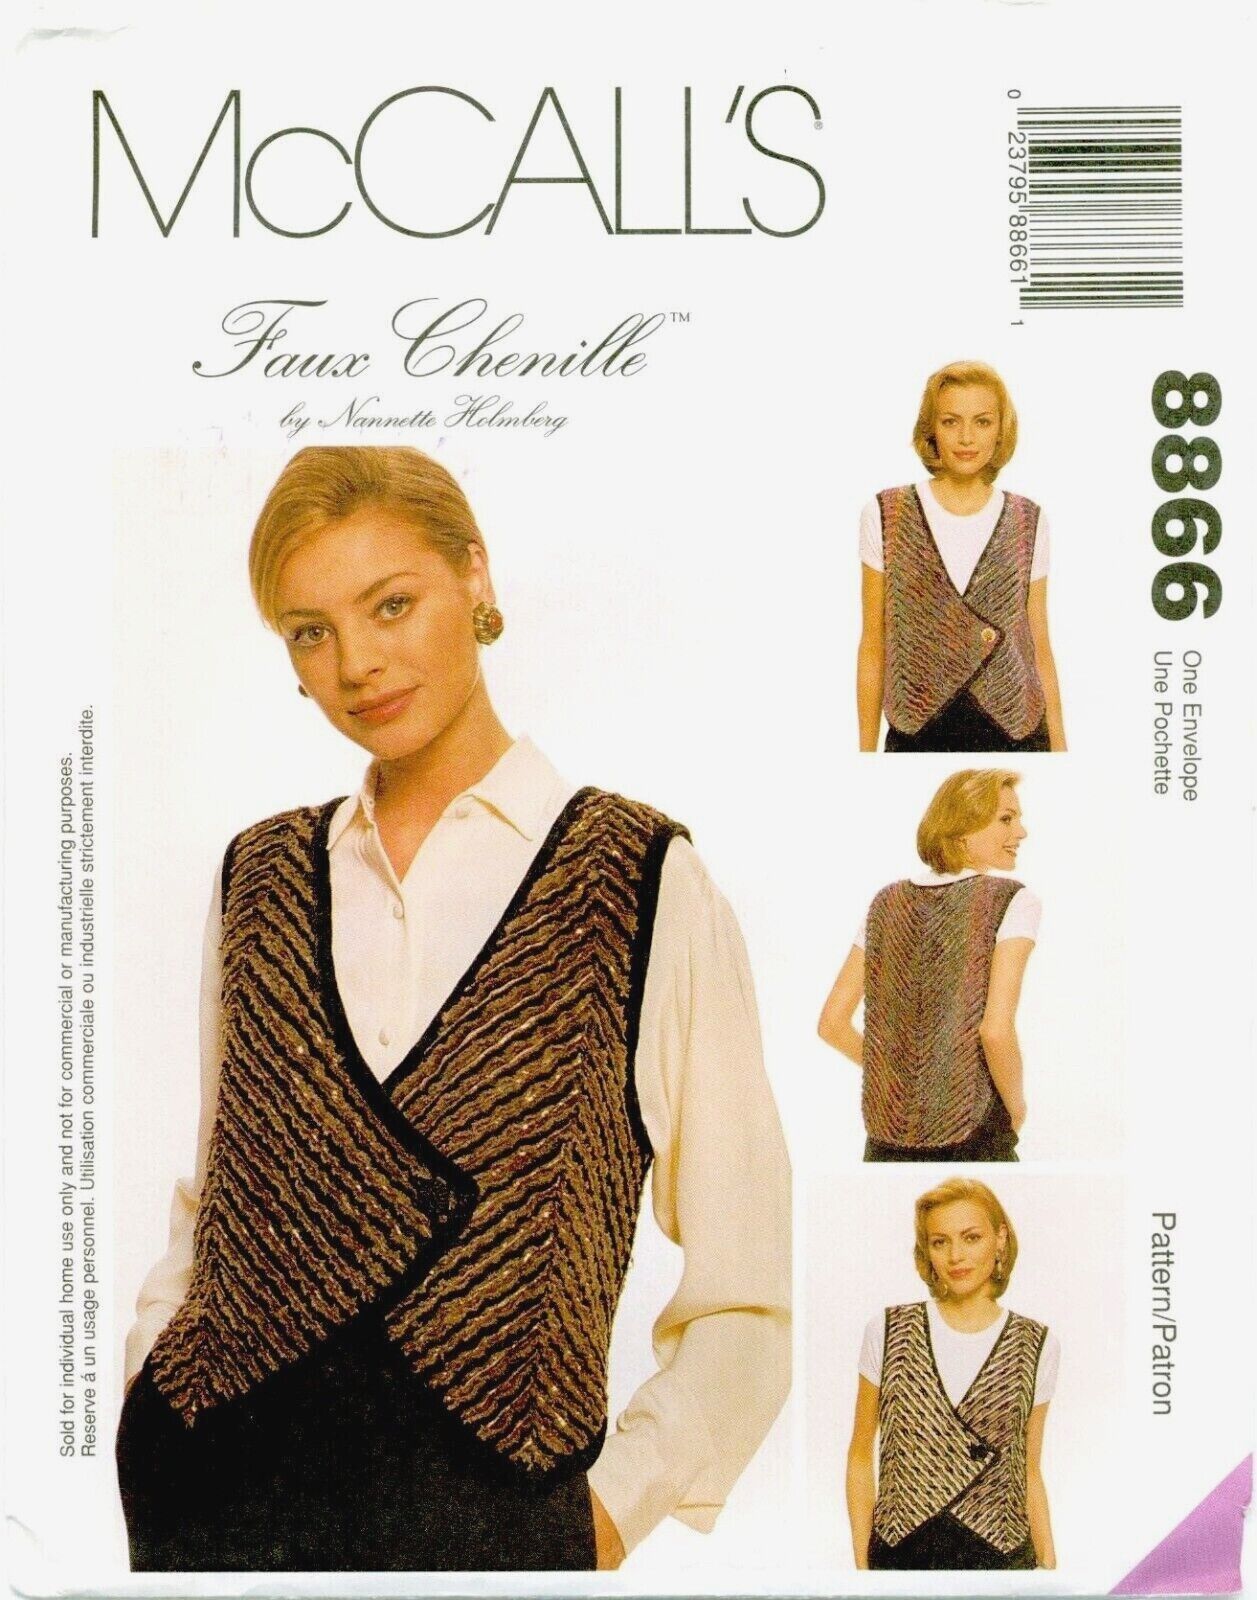 Primary image for McCalls 8866 Misses Dressy VEST Faux Chenille Loose Fit Holmberg pattern UNCUT